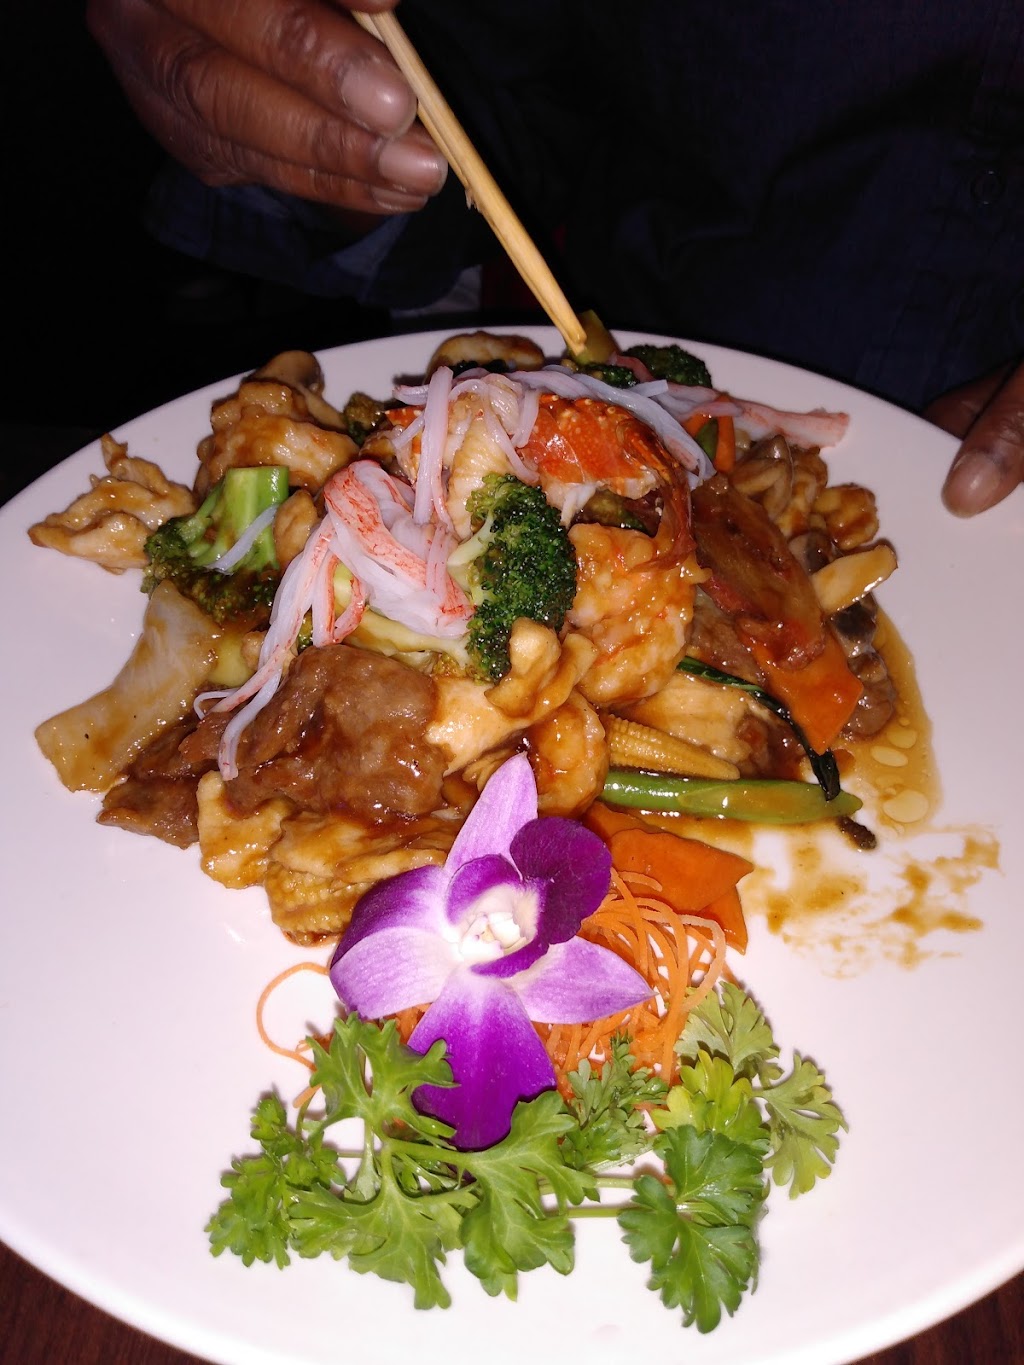 WASABI2 （Sushi And Chinese Restaurant) | 1375 Dilworthtown Rd, West Chester, PA 19382 | Phone: (610) 399-0999